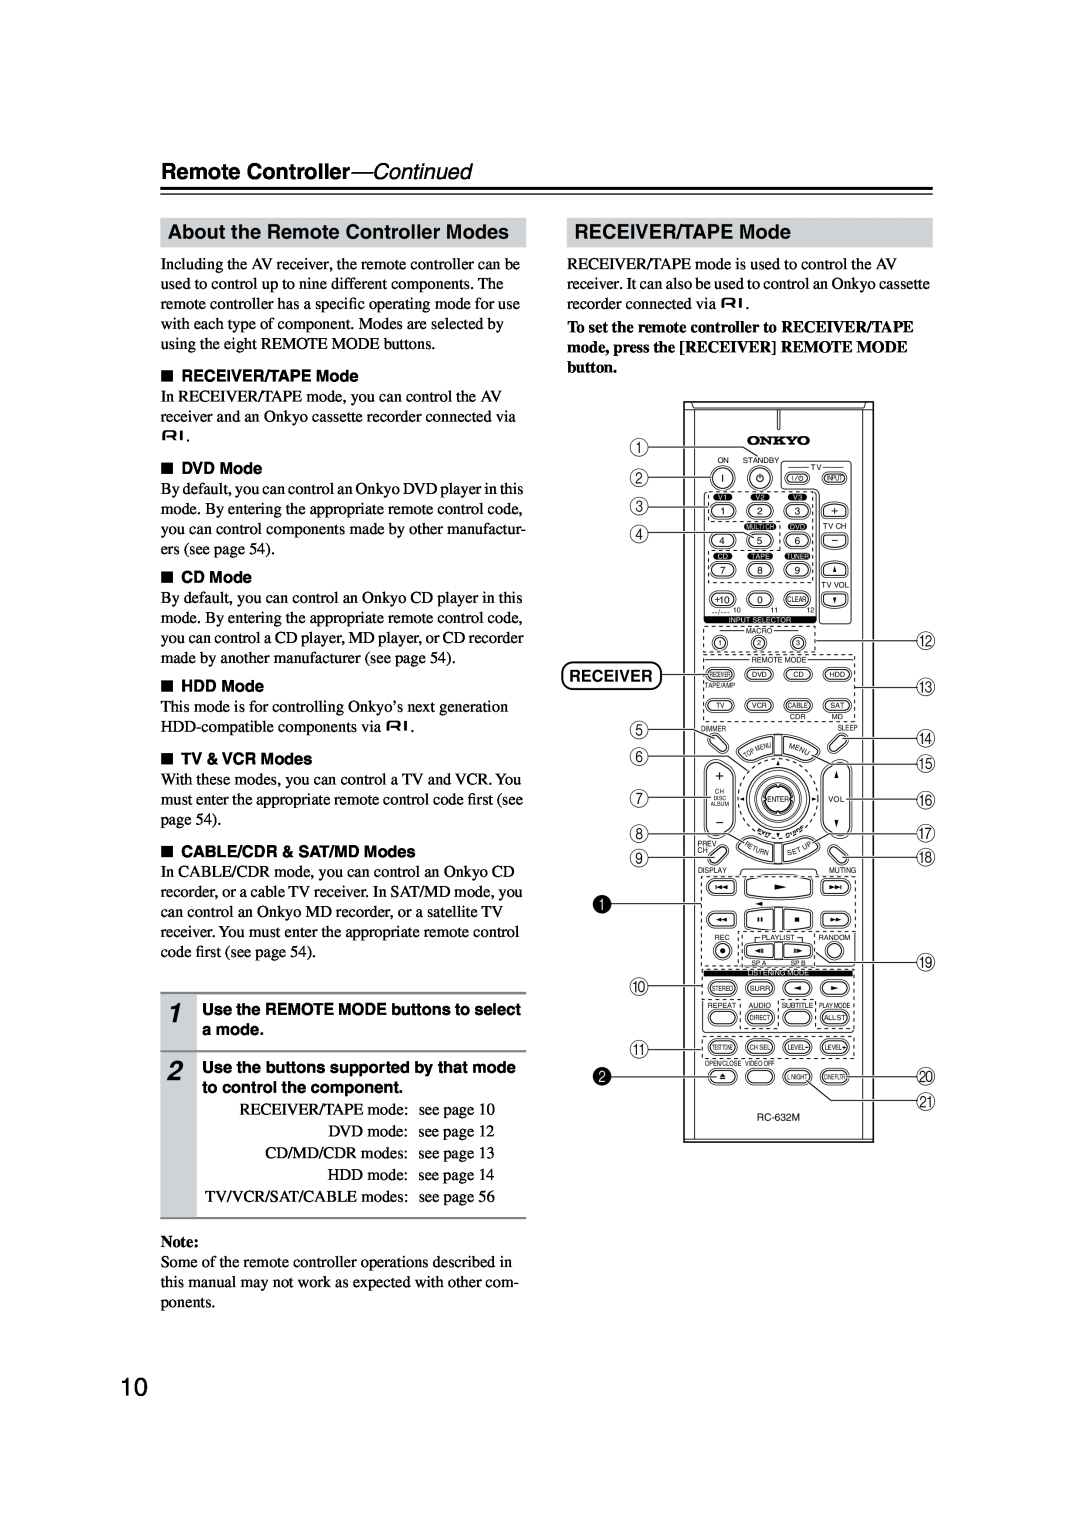 Onkyo TX-SR573 instruction manual Remote Controller—Continued, About the Remote Controller Modes, RECEIVER/TAPE Mode 